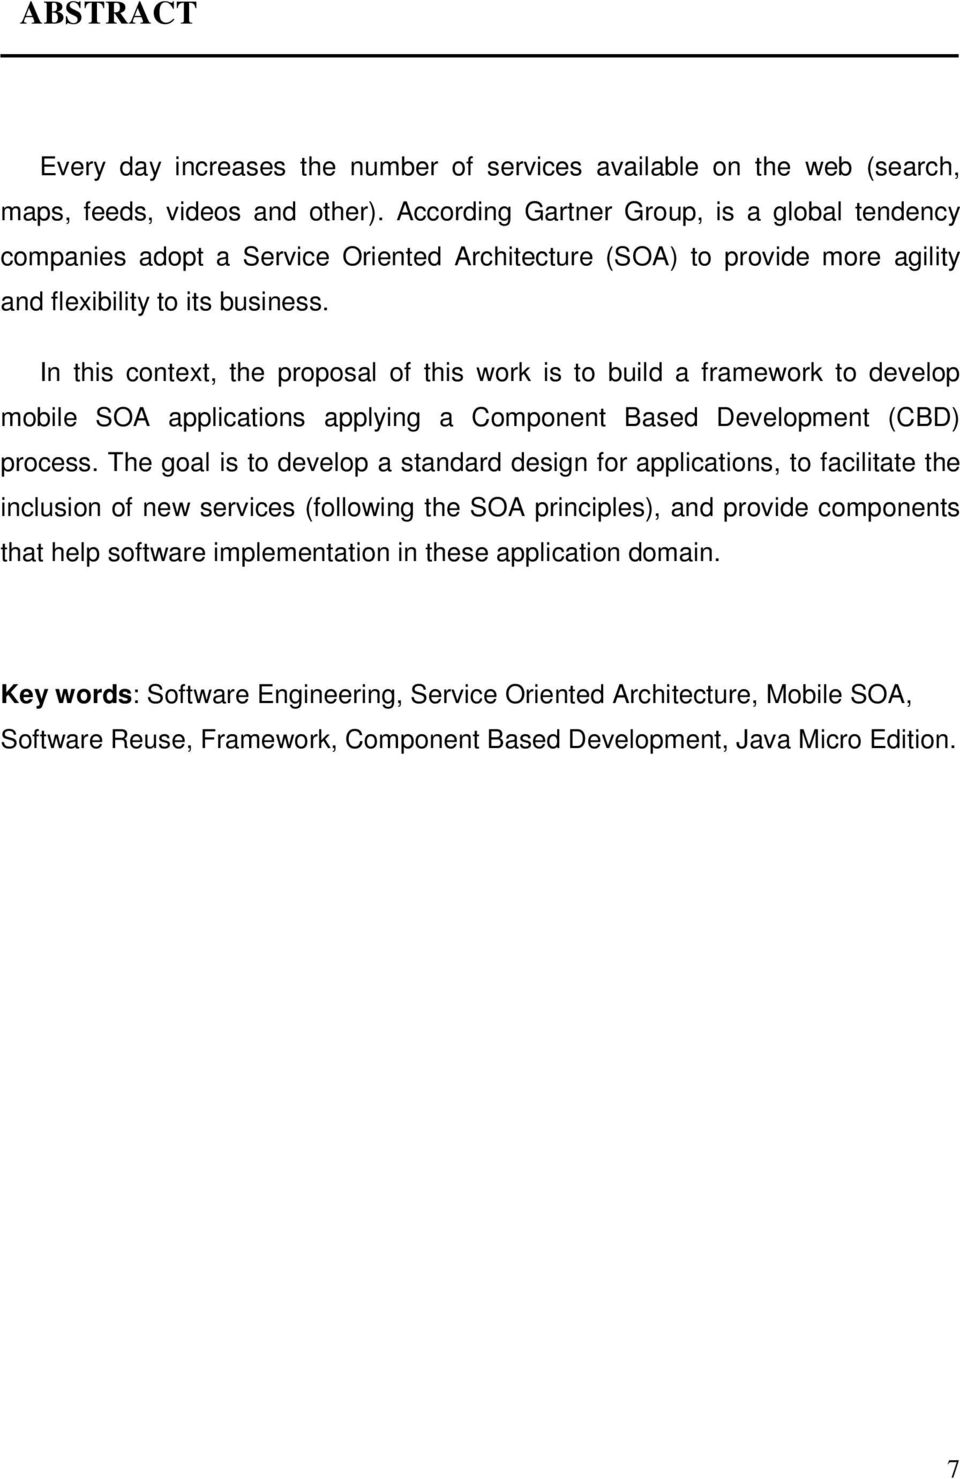 In this context, the proposal of this work is to build a framework to develop mobile SOA applications applying a Component Based Development (CBD) process.